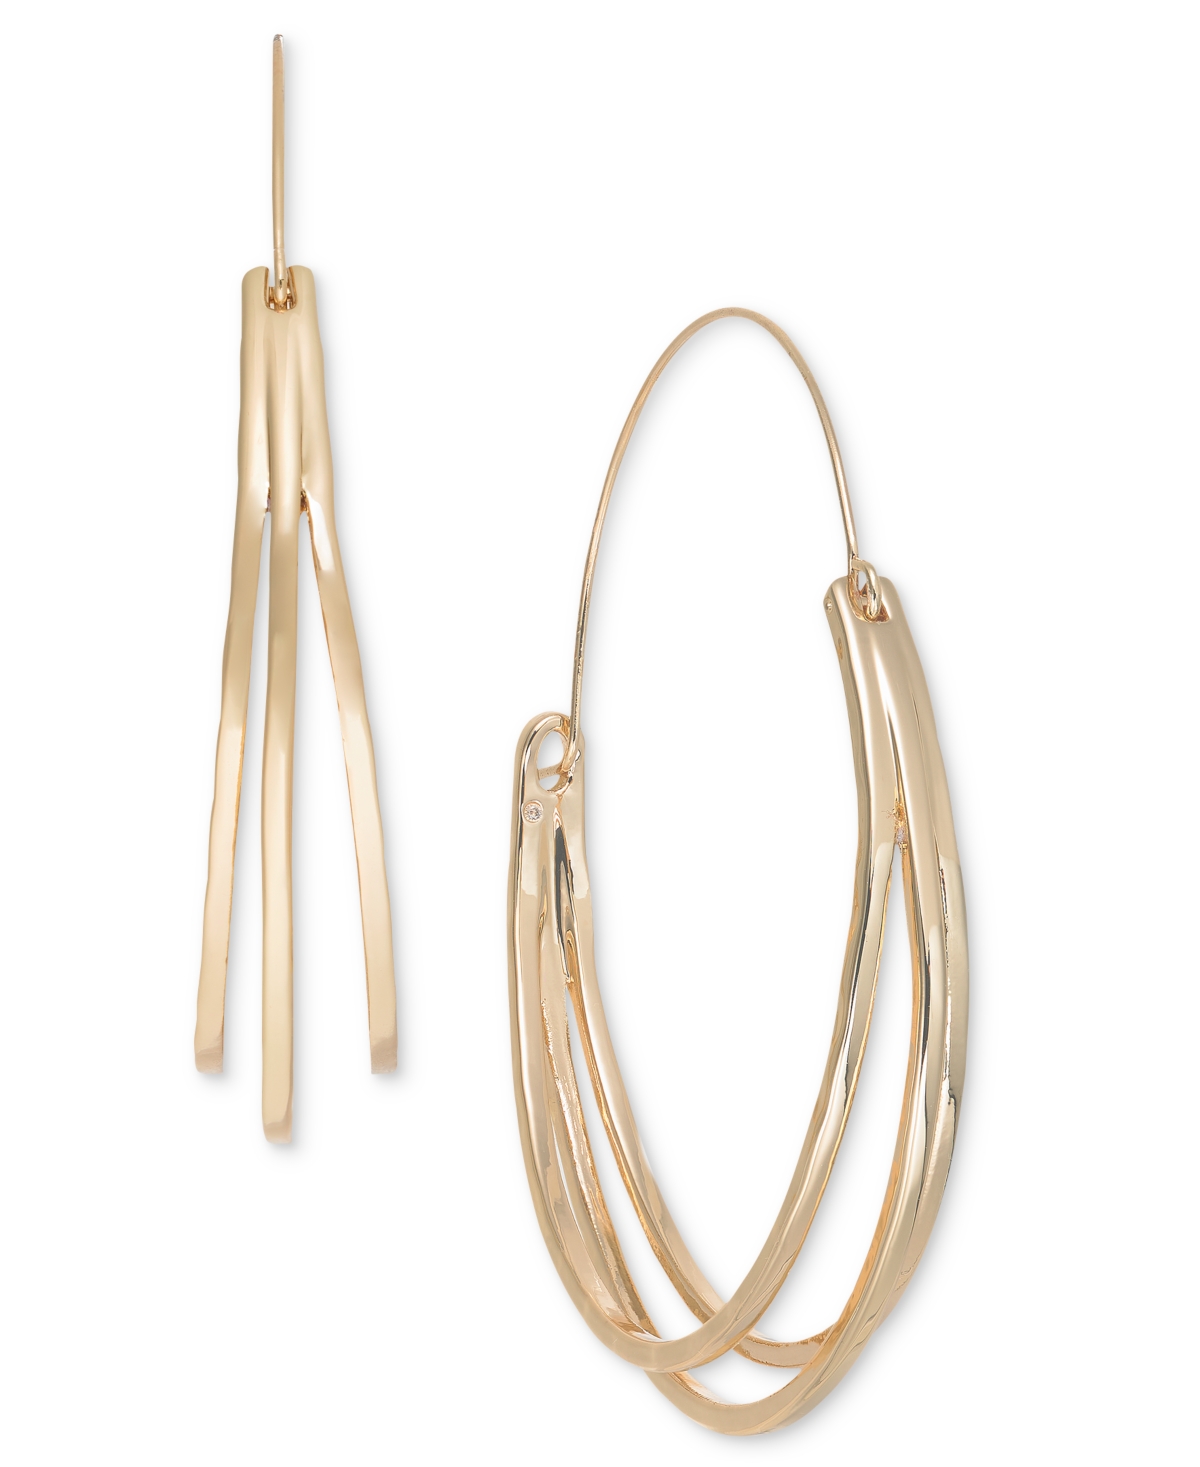 Gold-Tone Wing Hoop Earrings, 2-1/2", Created for Macy's - Silver